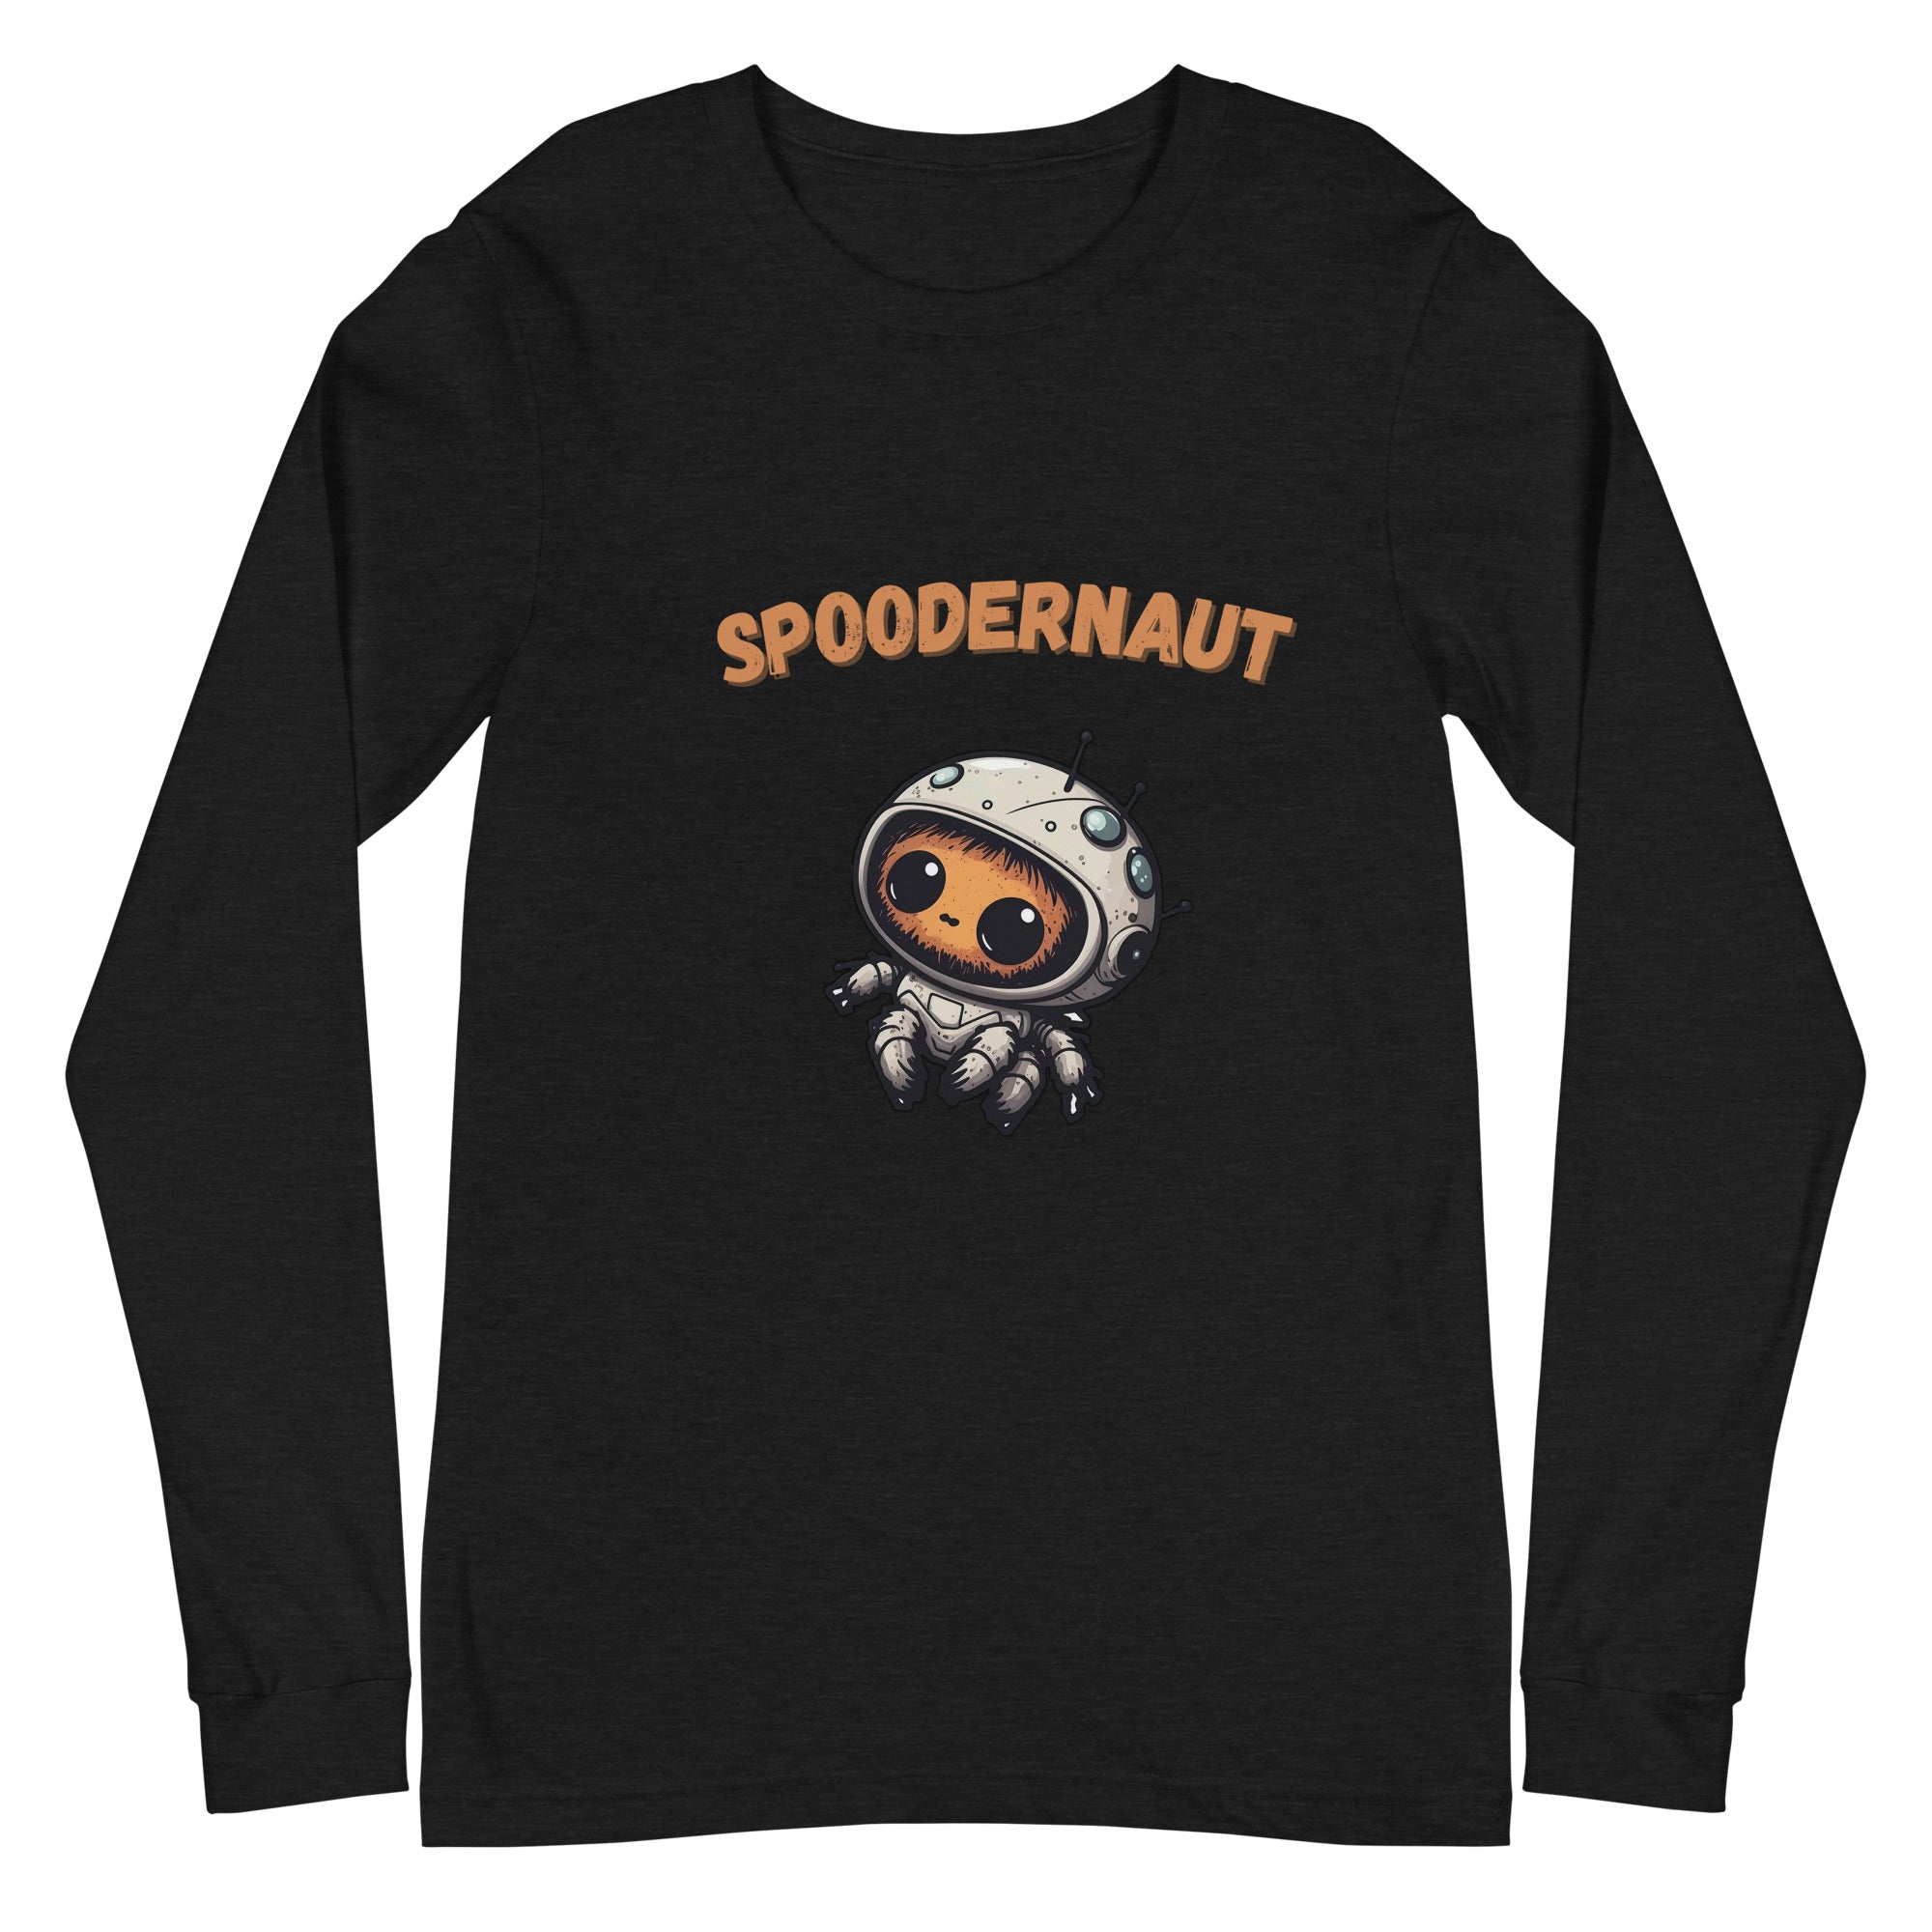 Spoodernaut Jumping Spider Unisex Long Sleeve Tee - Jumping Spiders For Sale - Spiders Source - #1 Regal Jumping Spider Store